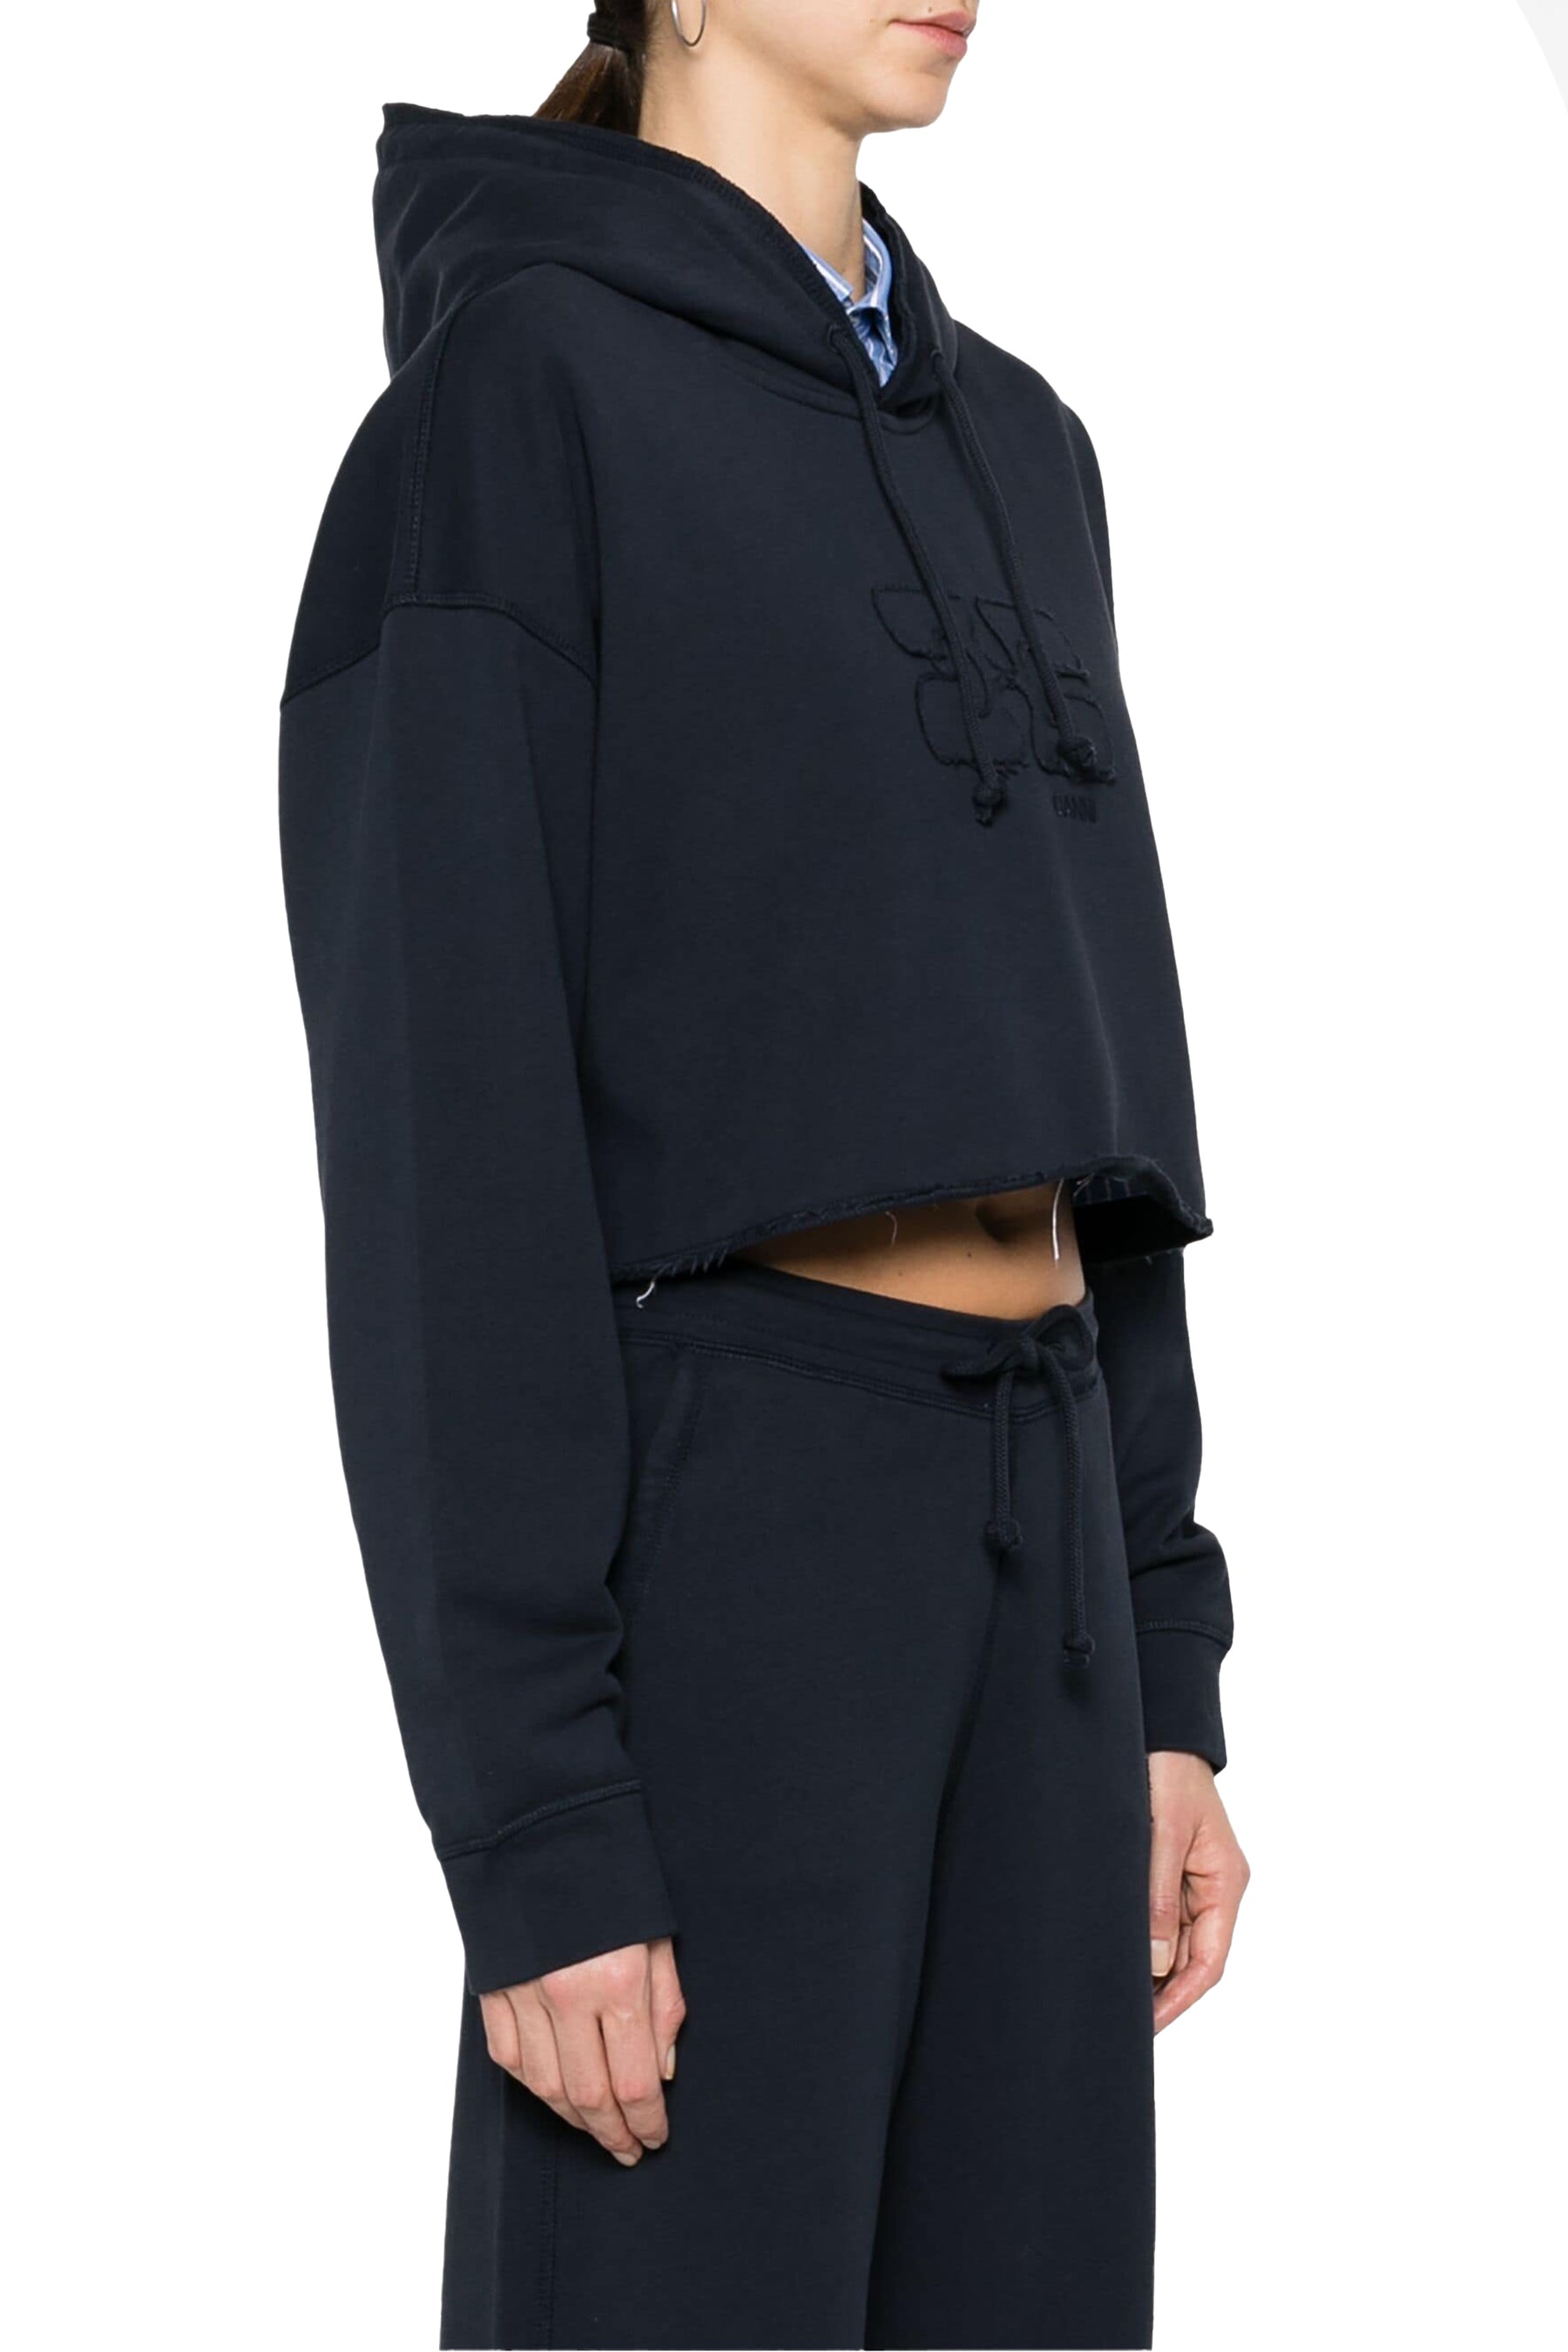 CROPPED OVERSIZED HOODIE / NVY